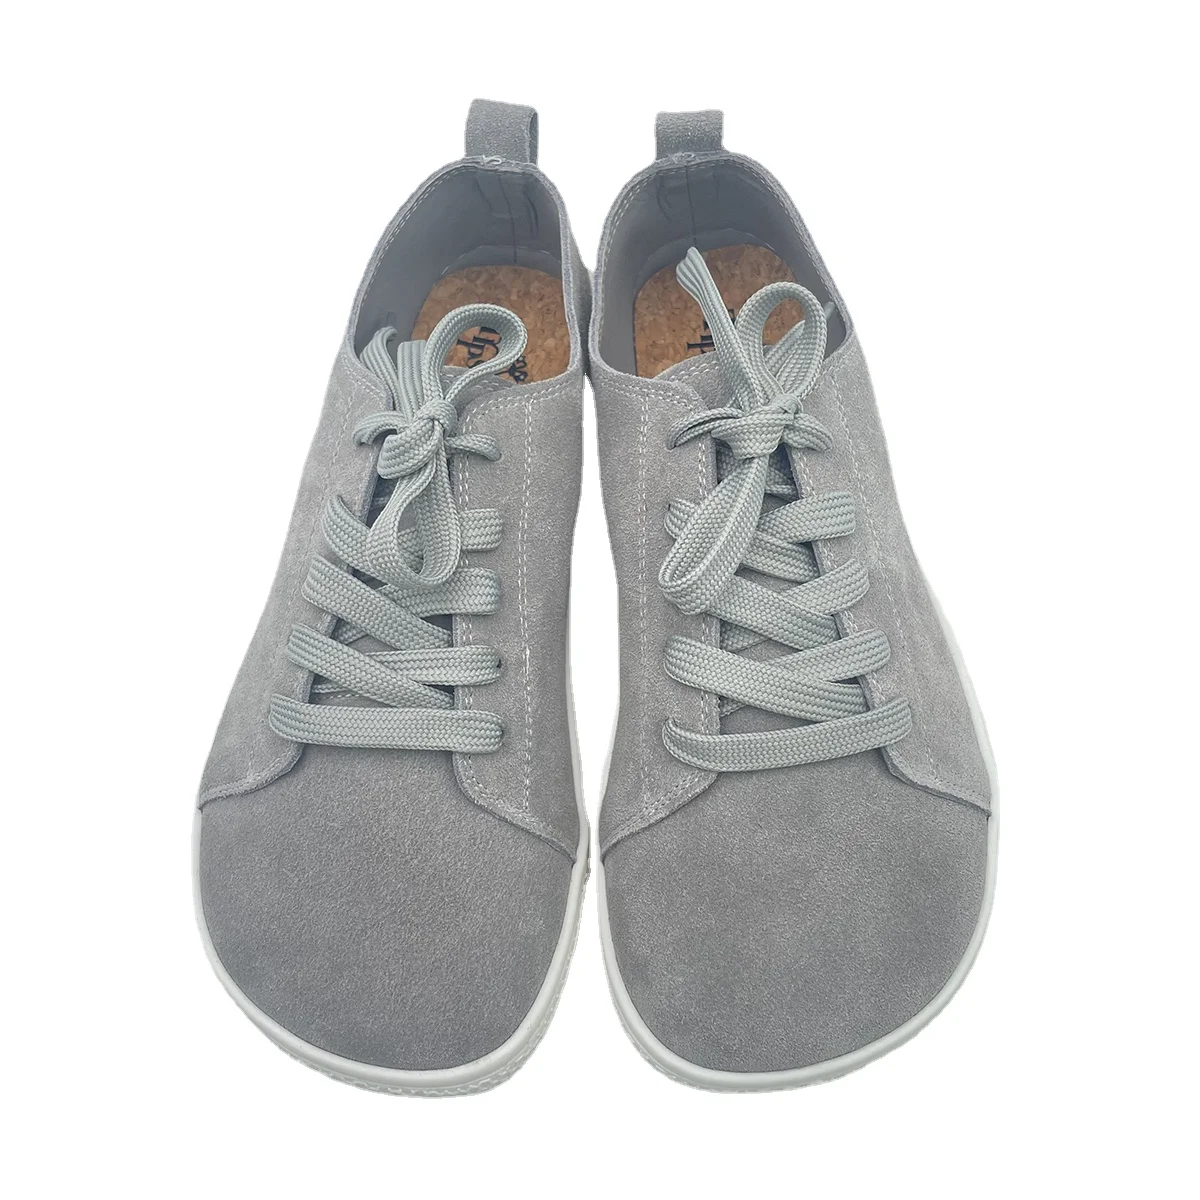 Tipsietoes Sprinng Autumn Genuine Leather Barefoot Sneaker For Women Fla... - $118.05